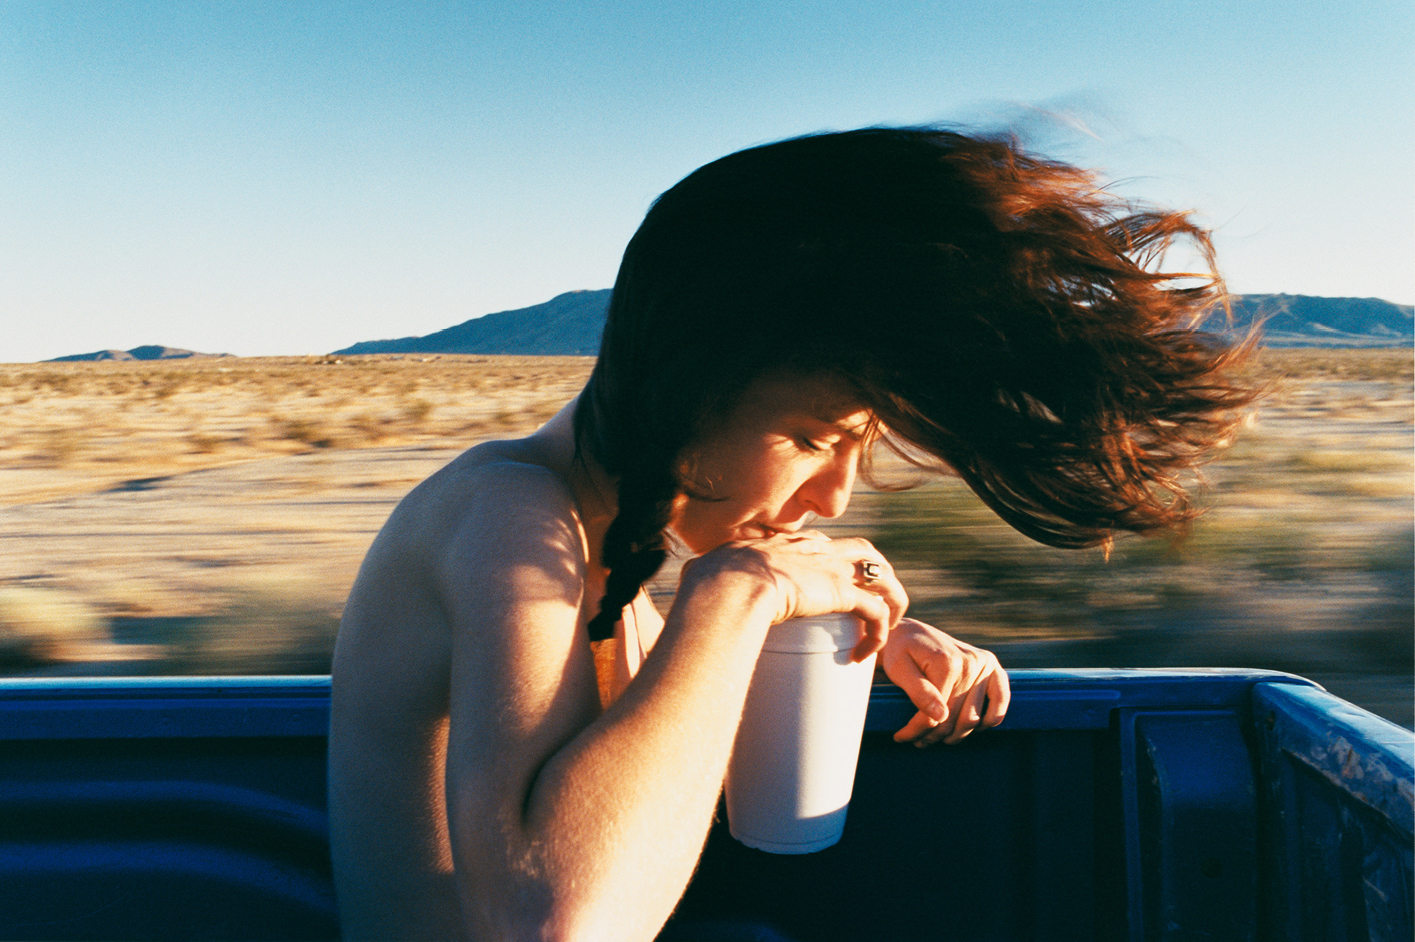 Dakota Hair (2004) by Ryan McGinley will be on show as part of the V&A's Fragile Beauty